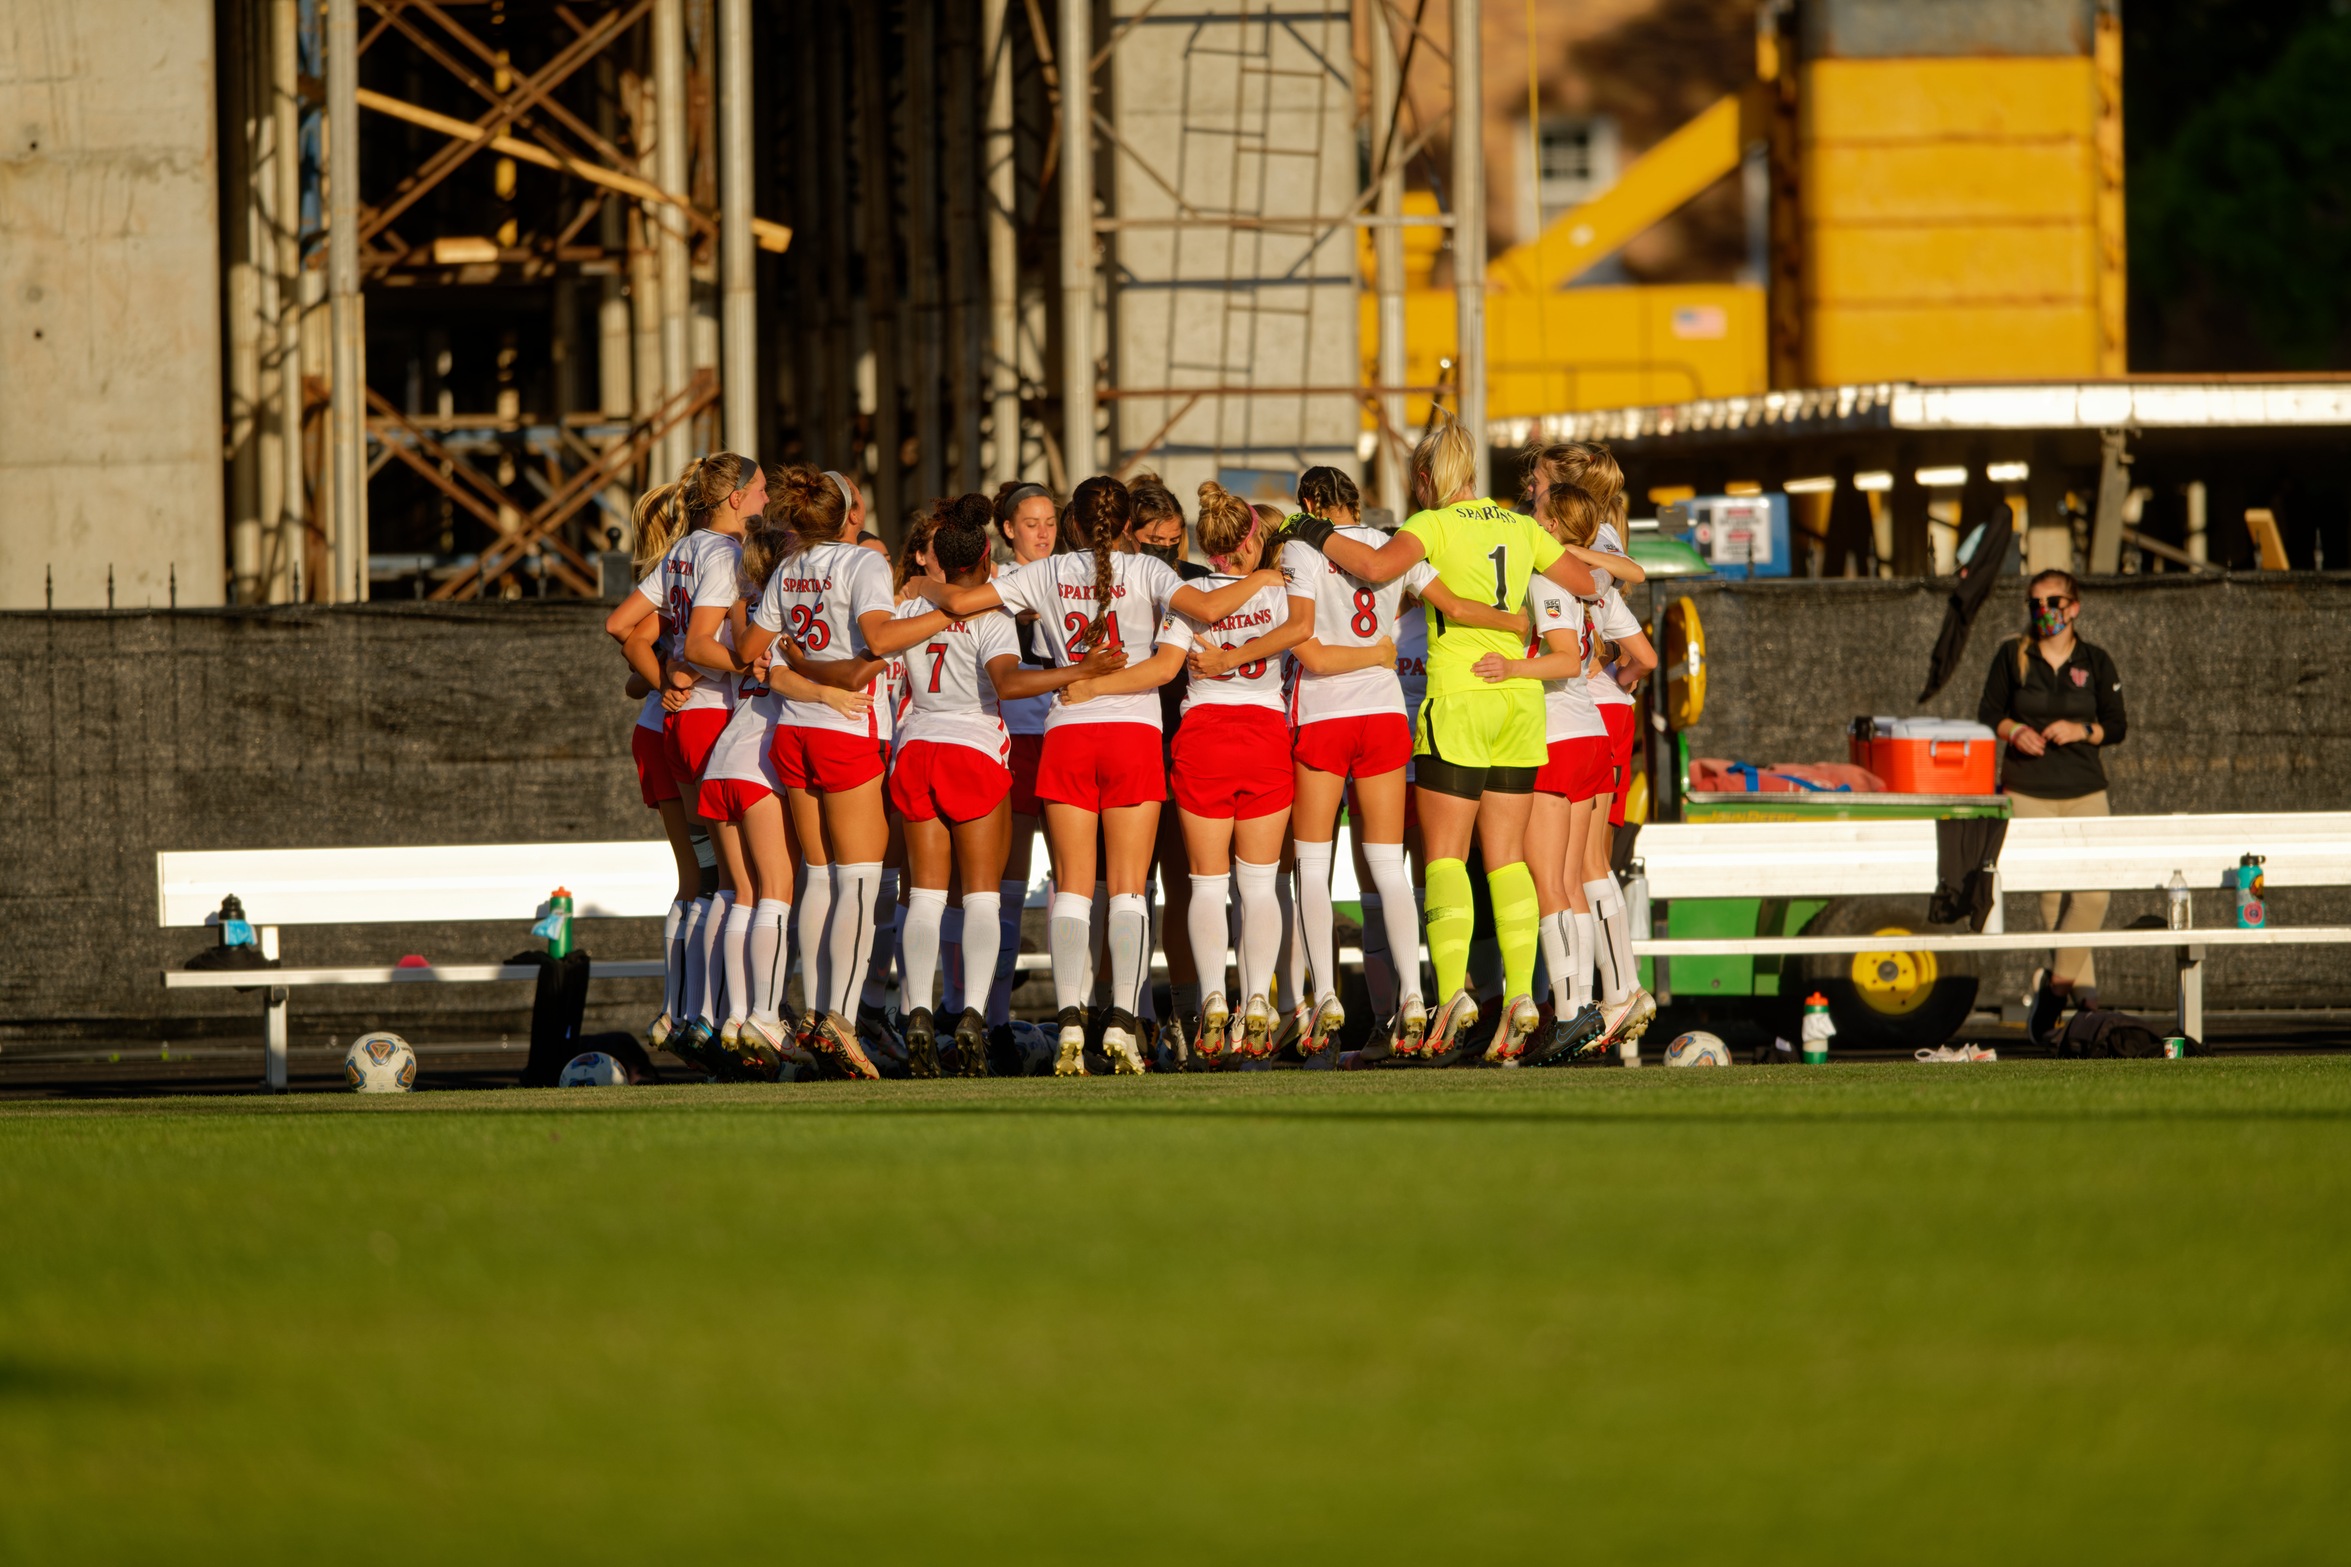 The University of Tampa Spartans Women's Soccer Team